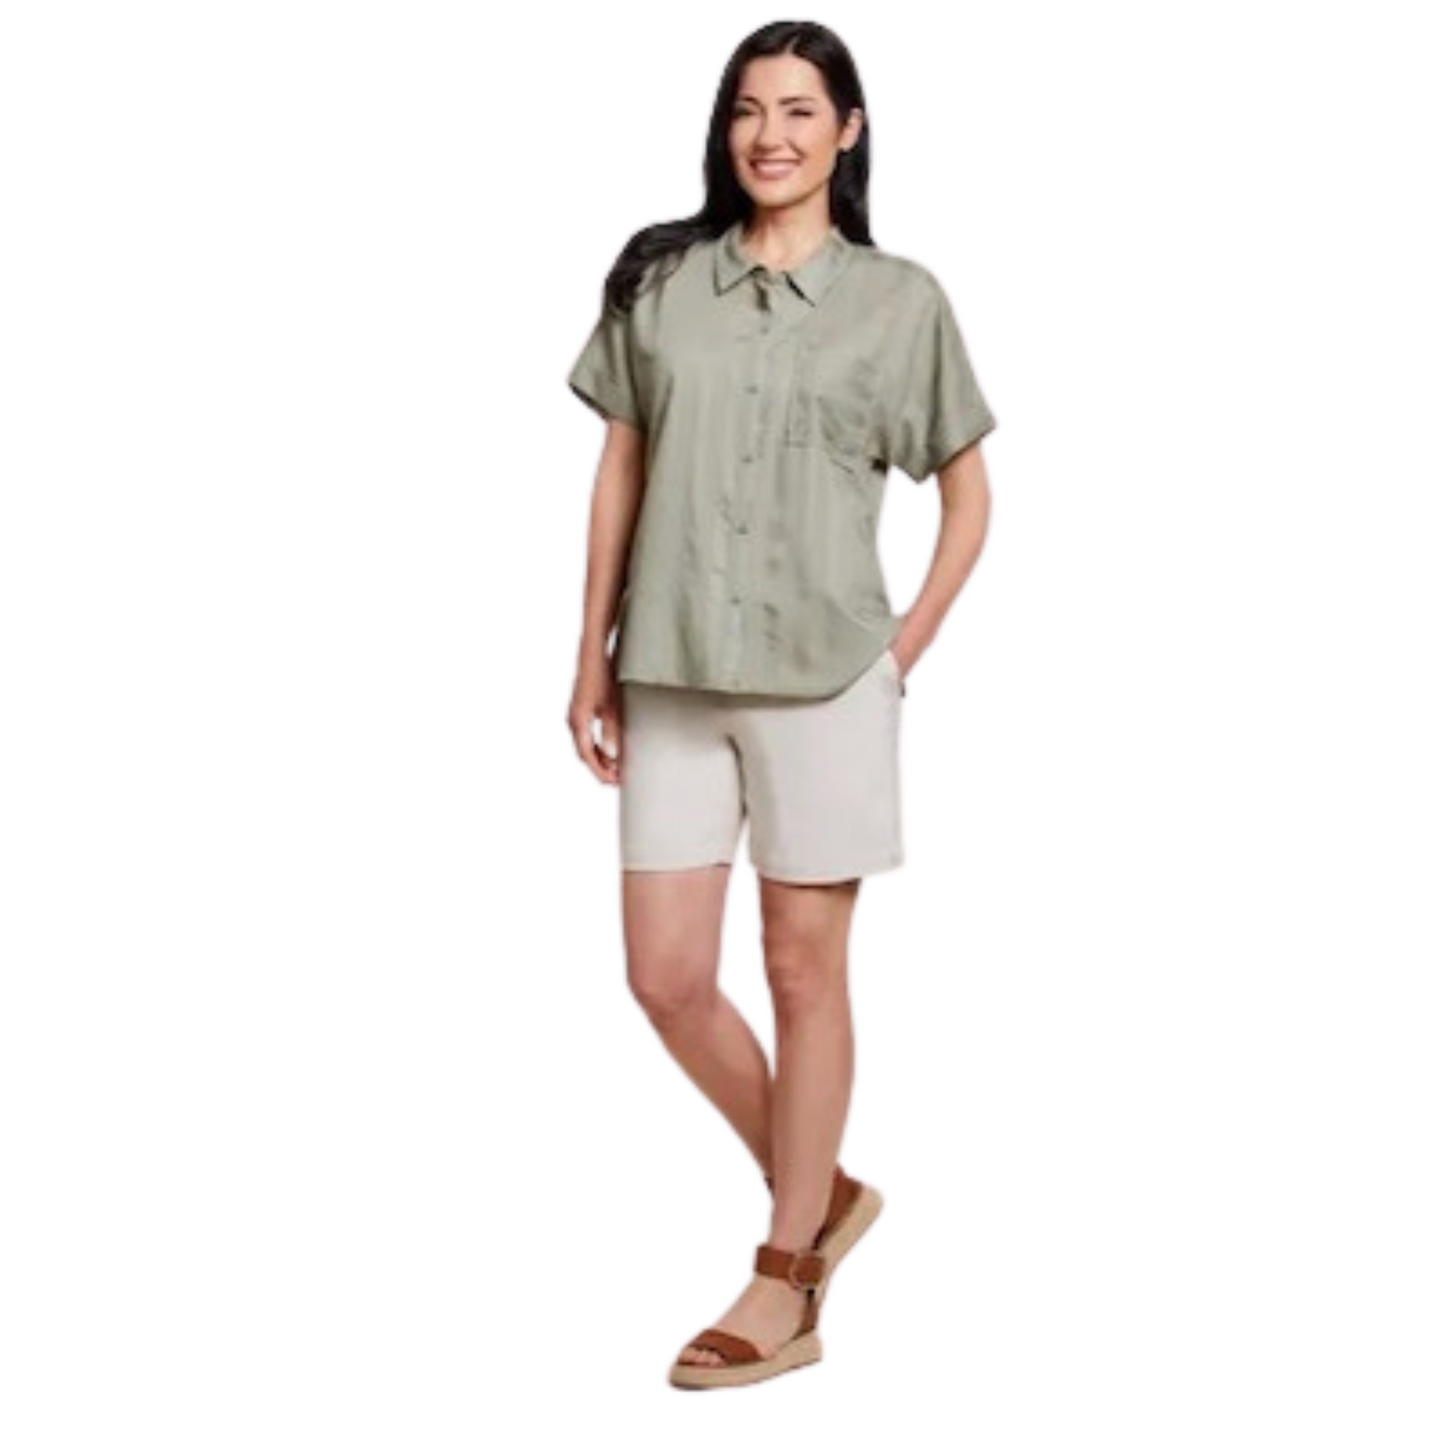 These sleek pull-on shorts are putting serious pep in our step! We love the stretch woven fabric with a pull-on design, 7" inseam, FIA fit, side slits at the hem, functional front pockets, and FLATTEN-IT technology in the front that produces a slender figure for all-day flattery.